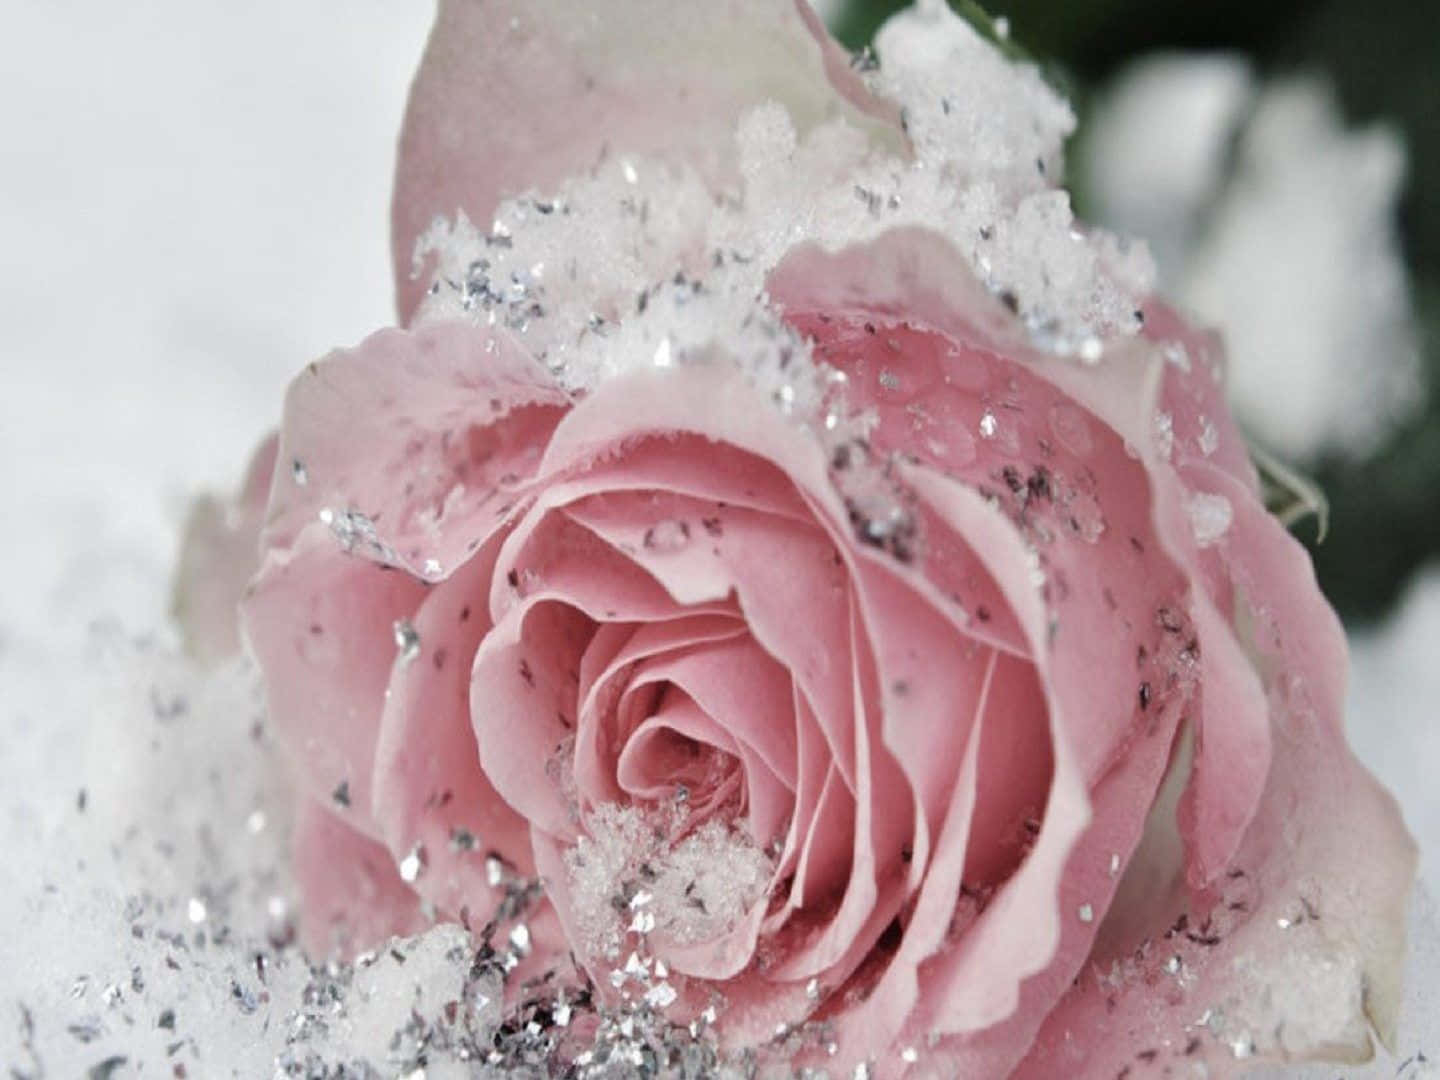 Take A Moment To Appreciate The Beauty of This Pink Rose